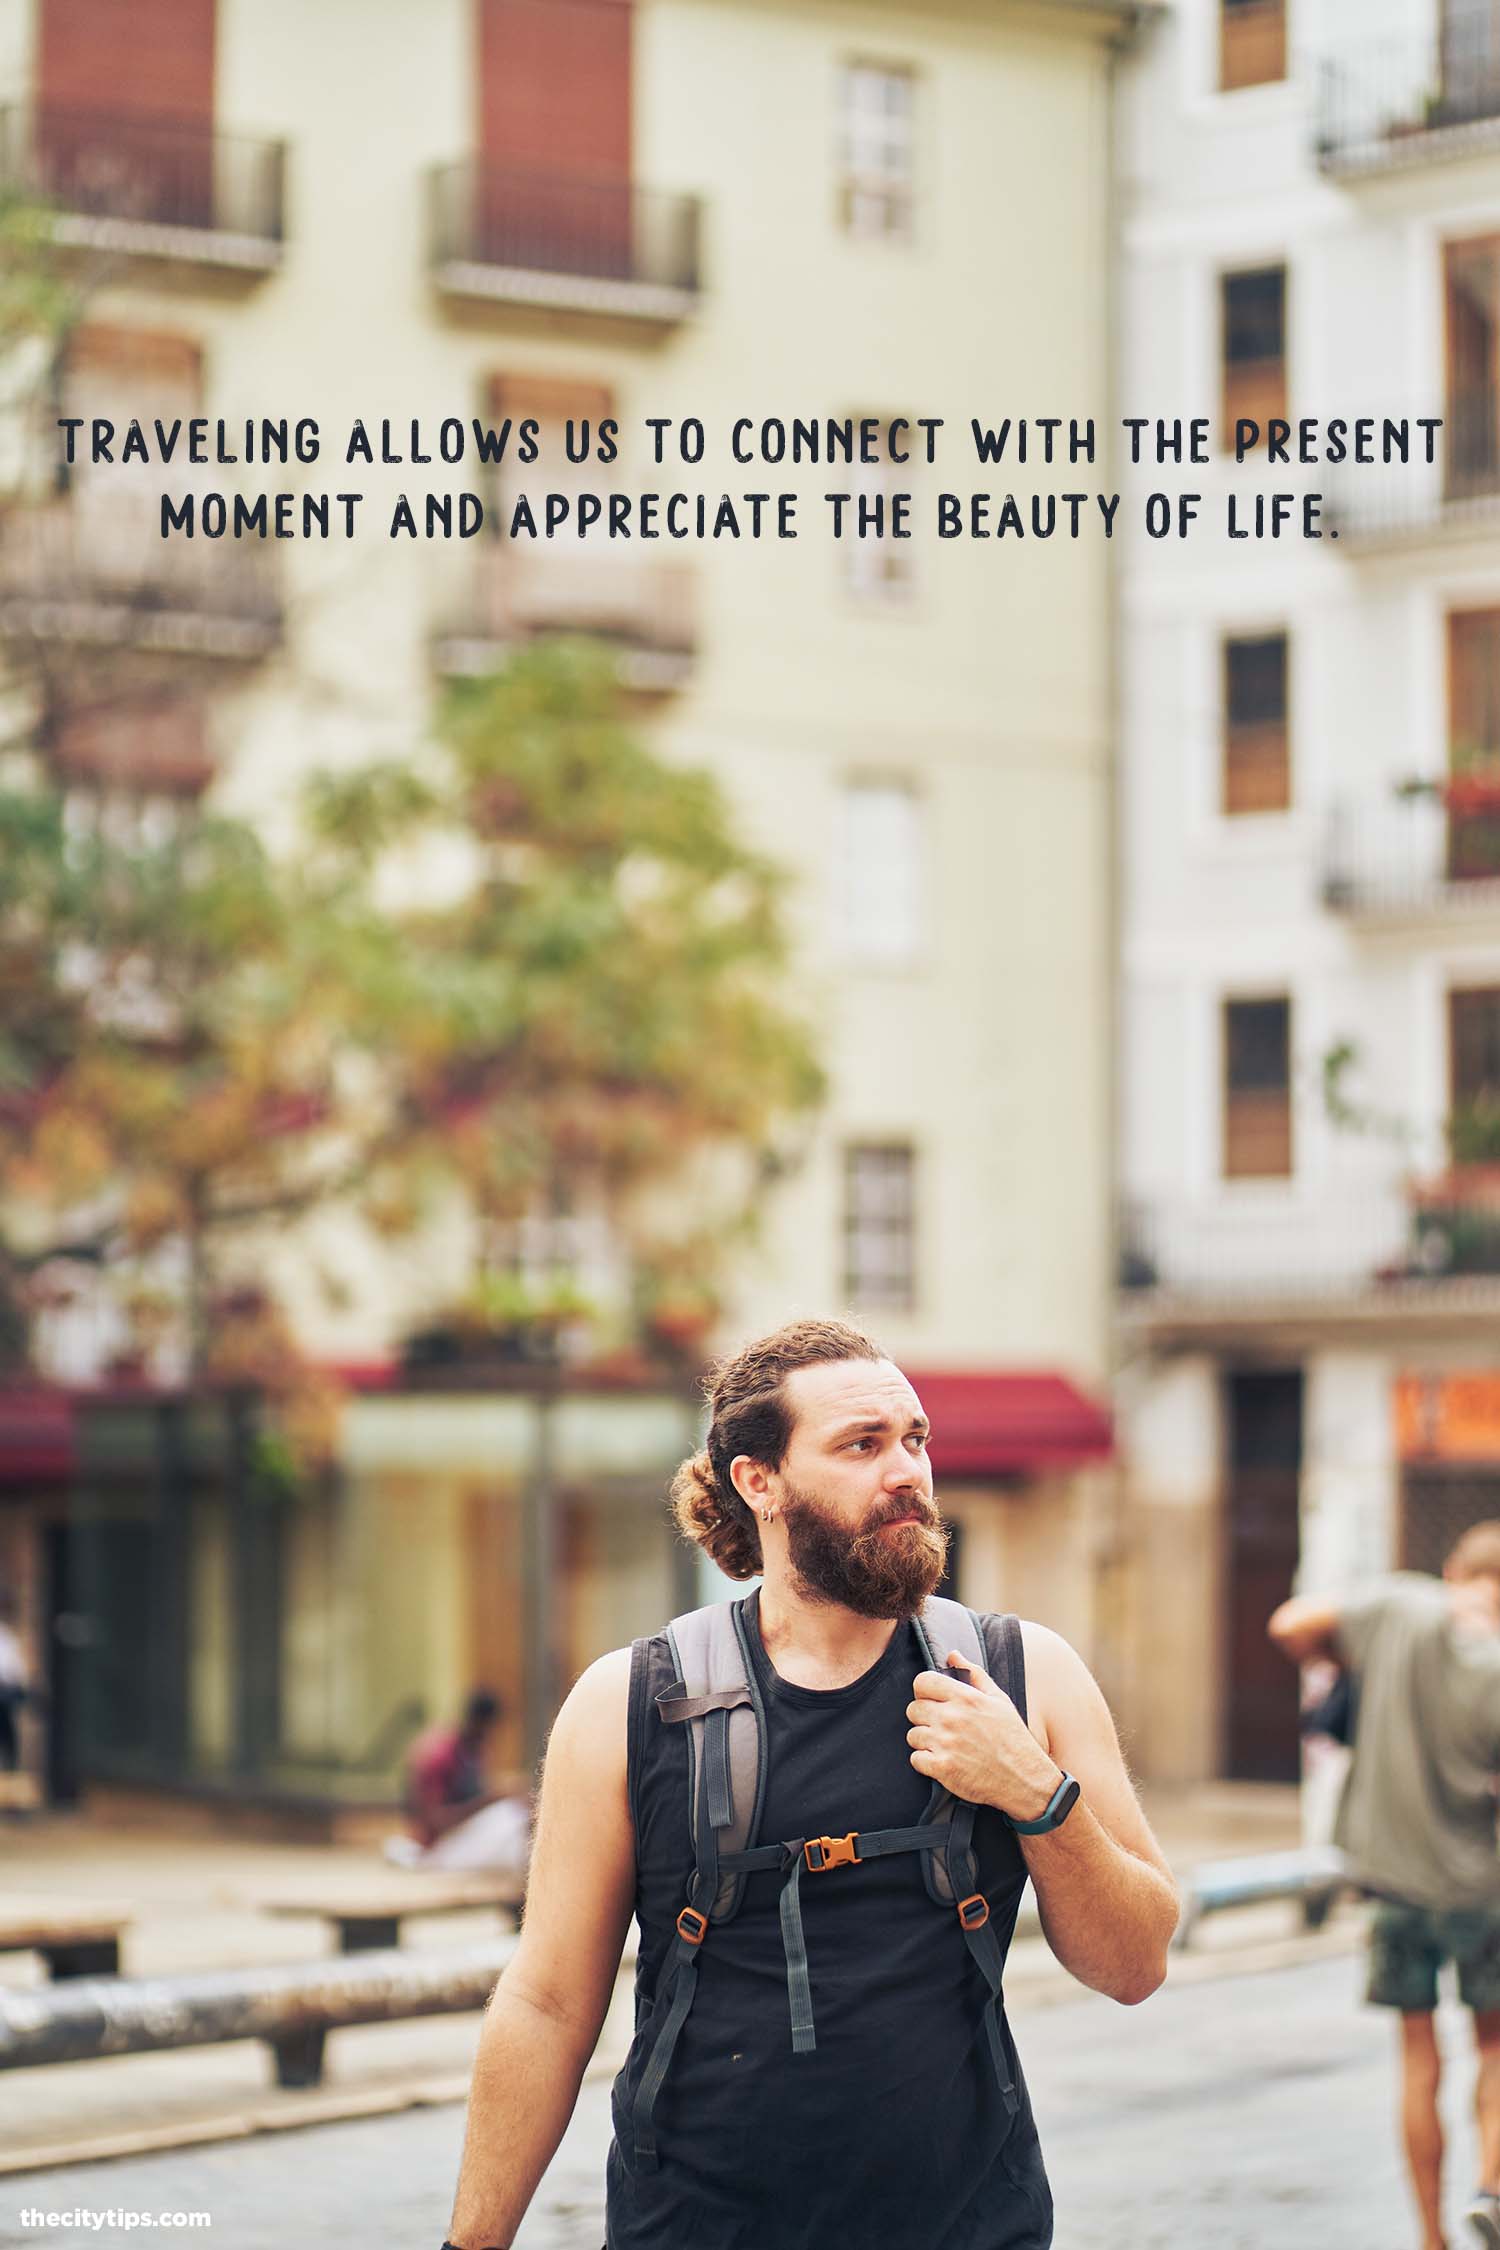 "Traveling allows us to connect with the present moment and appreciate the beauty of life." by Anonymous